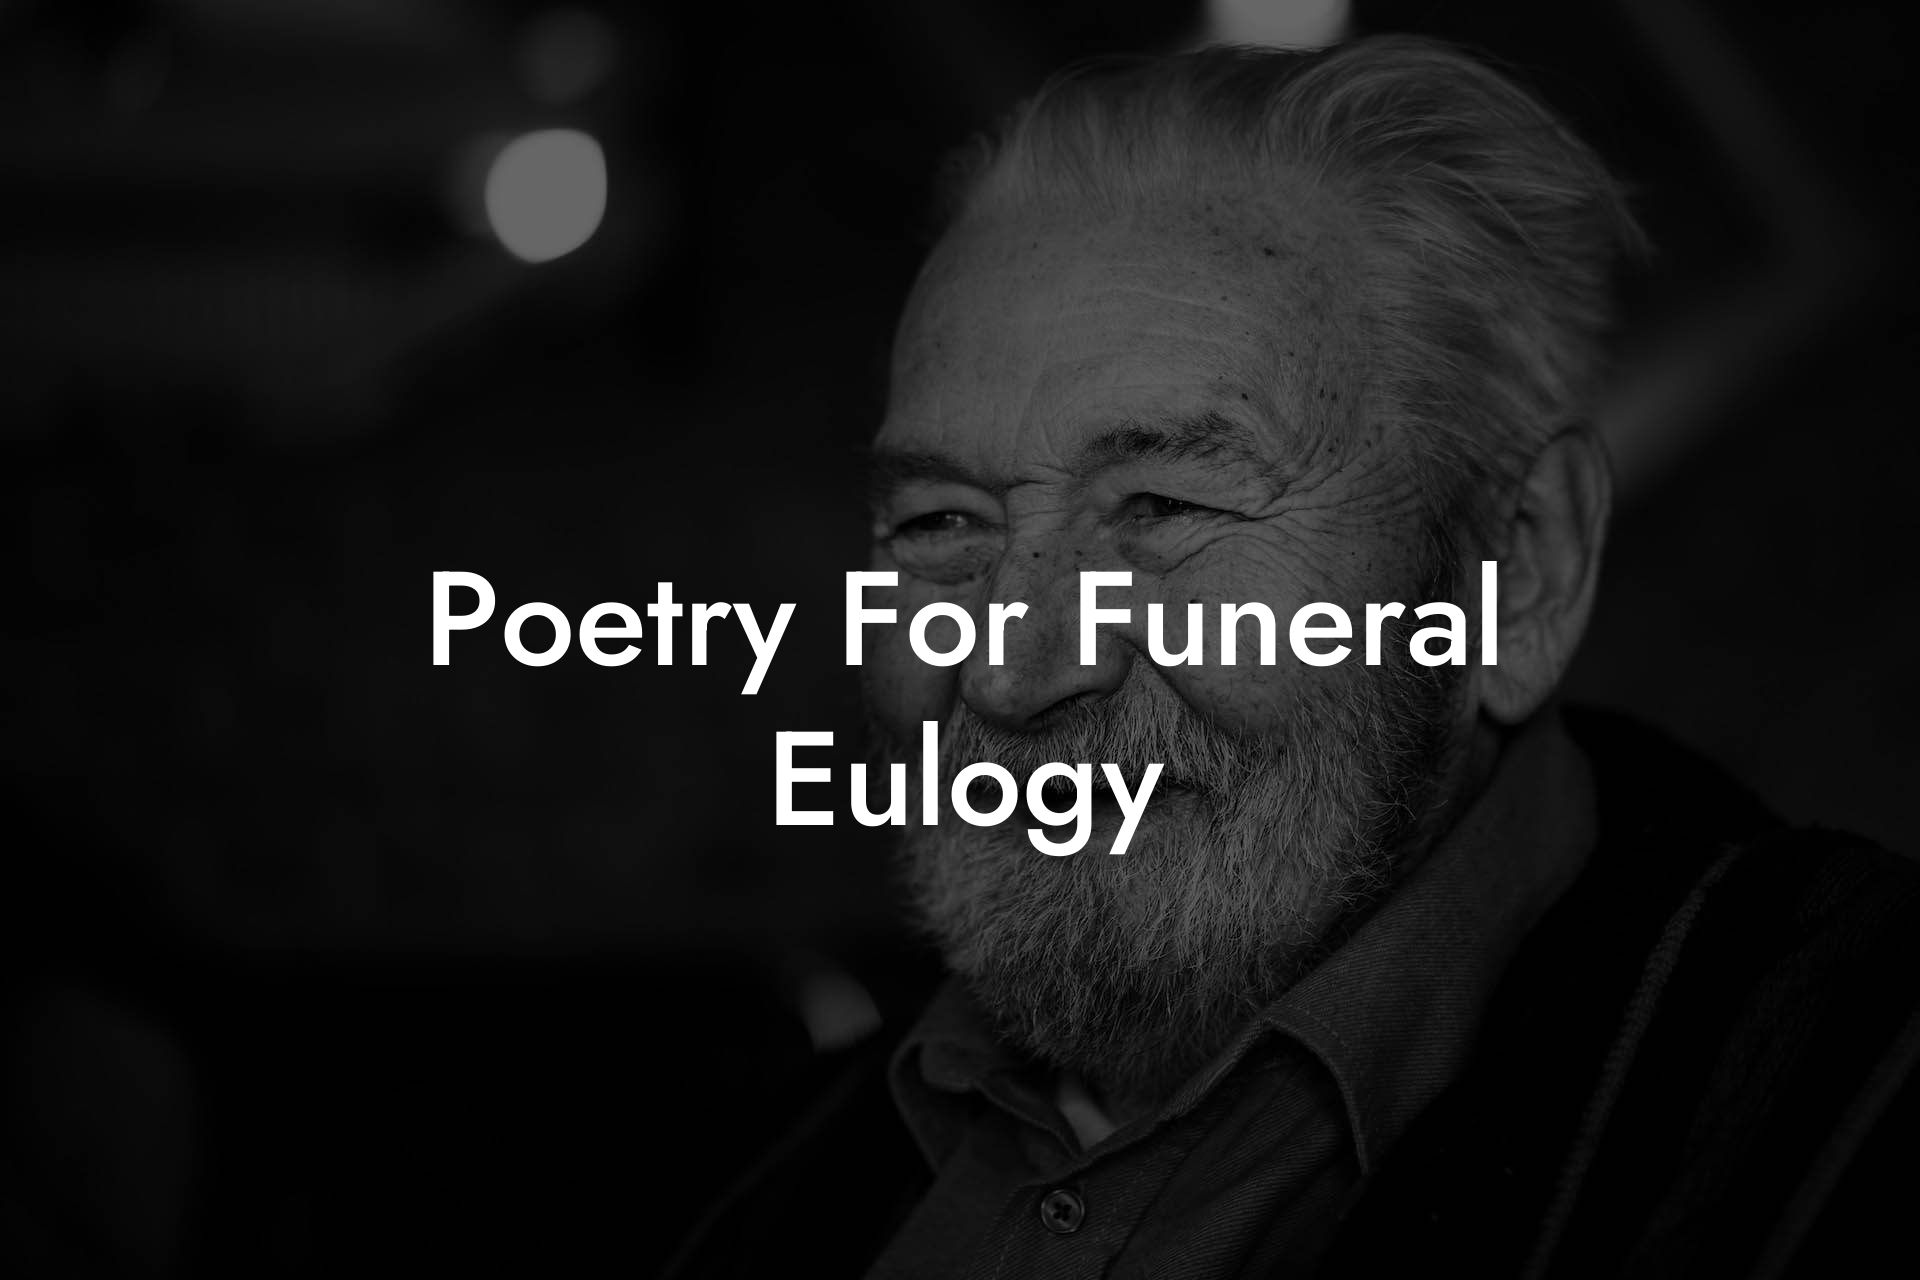 Poetry For Funeral Eulogy